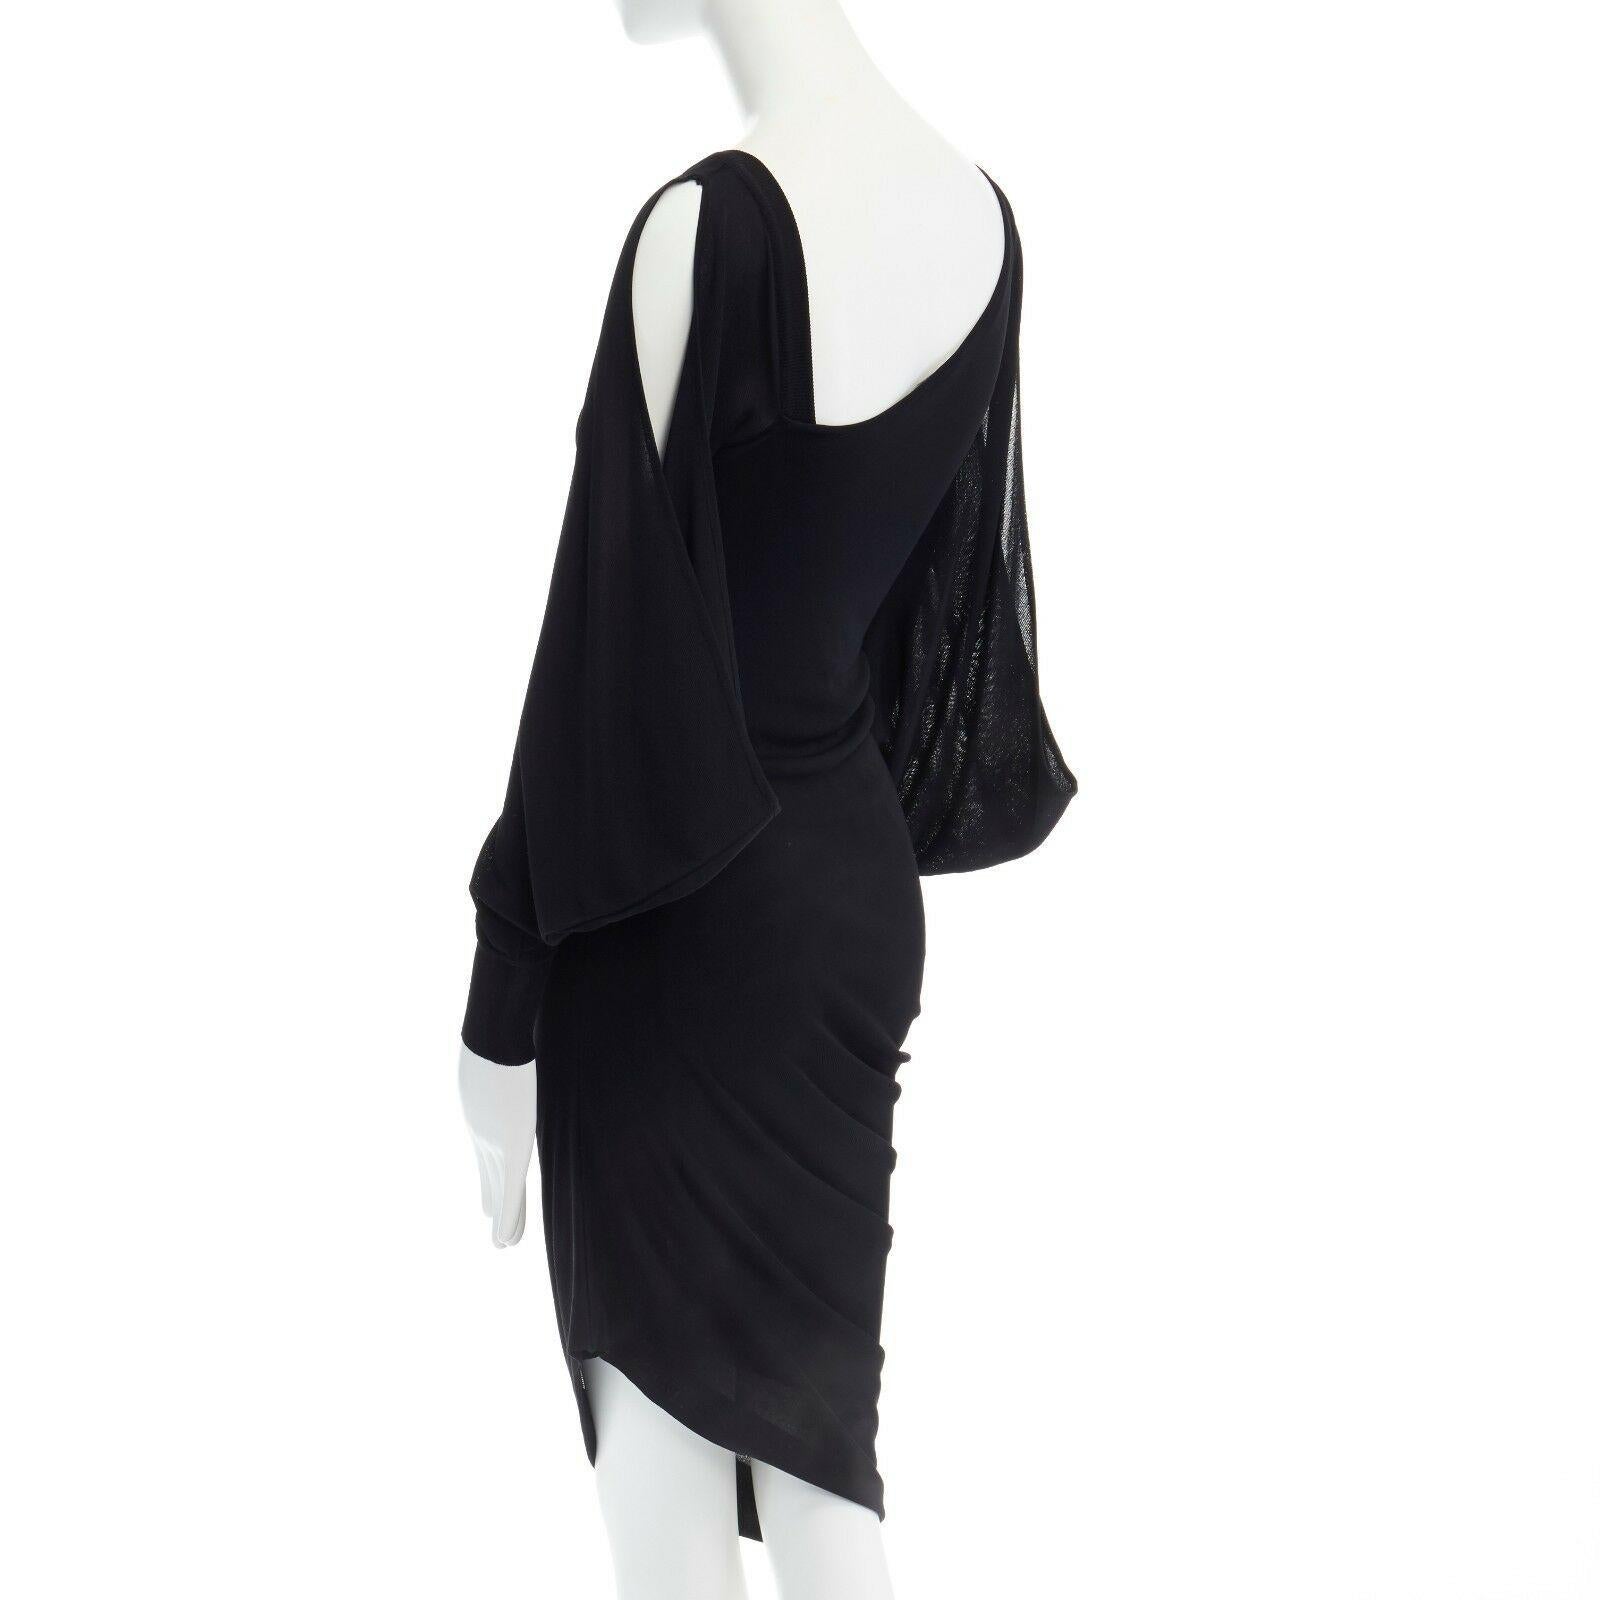 ALEXANDER MCQUEEN black knit asymmetric neckline kimono sleeve draped dress S

ALEXANDER MCQUEEN
Feels like jersey knit. Asymmetric neckline. Long sleeve. Wide kimono sleeves. Curved cut draped hem. Fully lined.

CONDITION
Very good, this item was